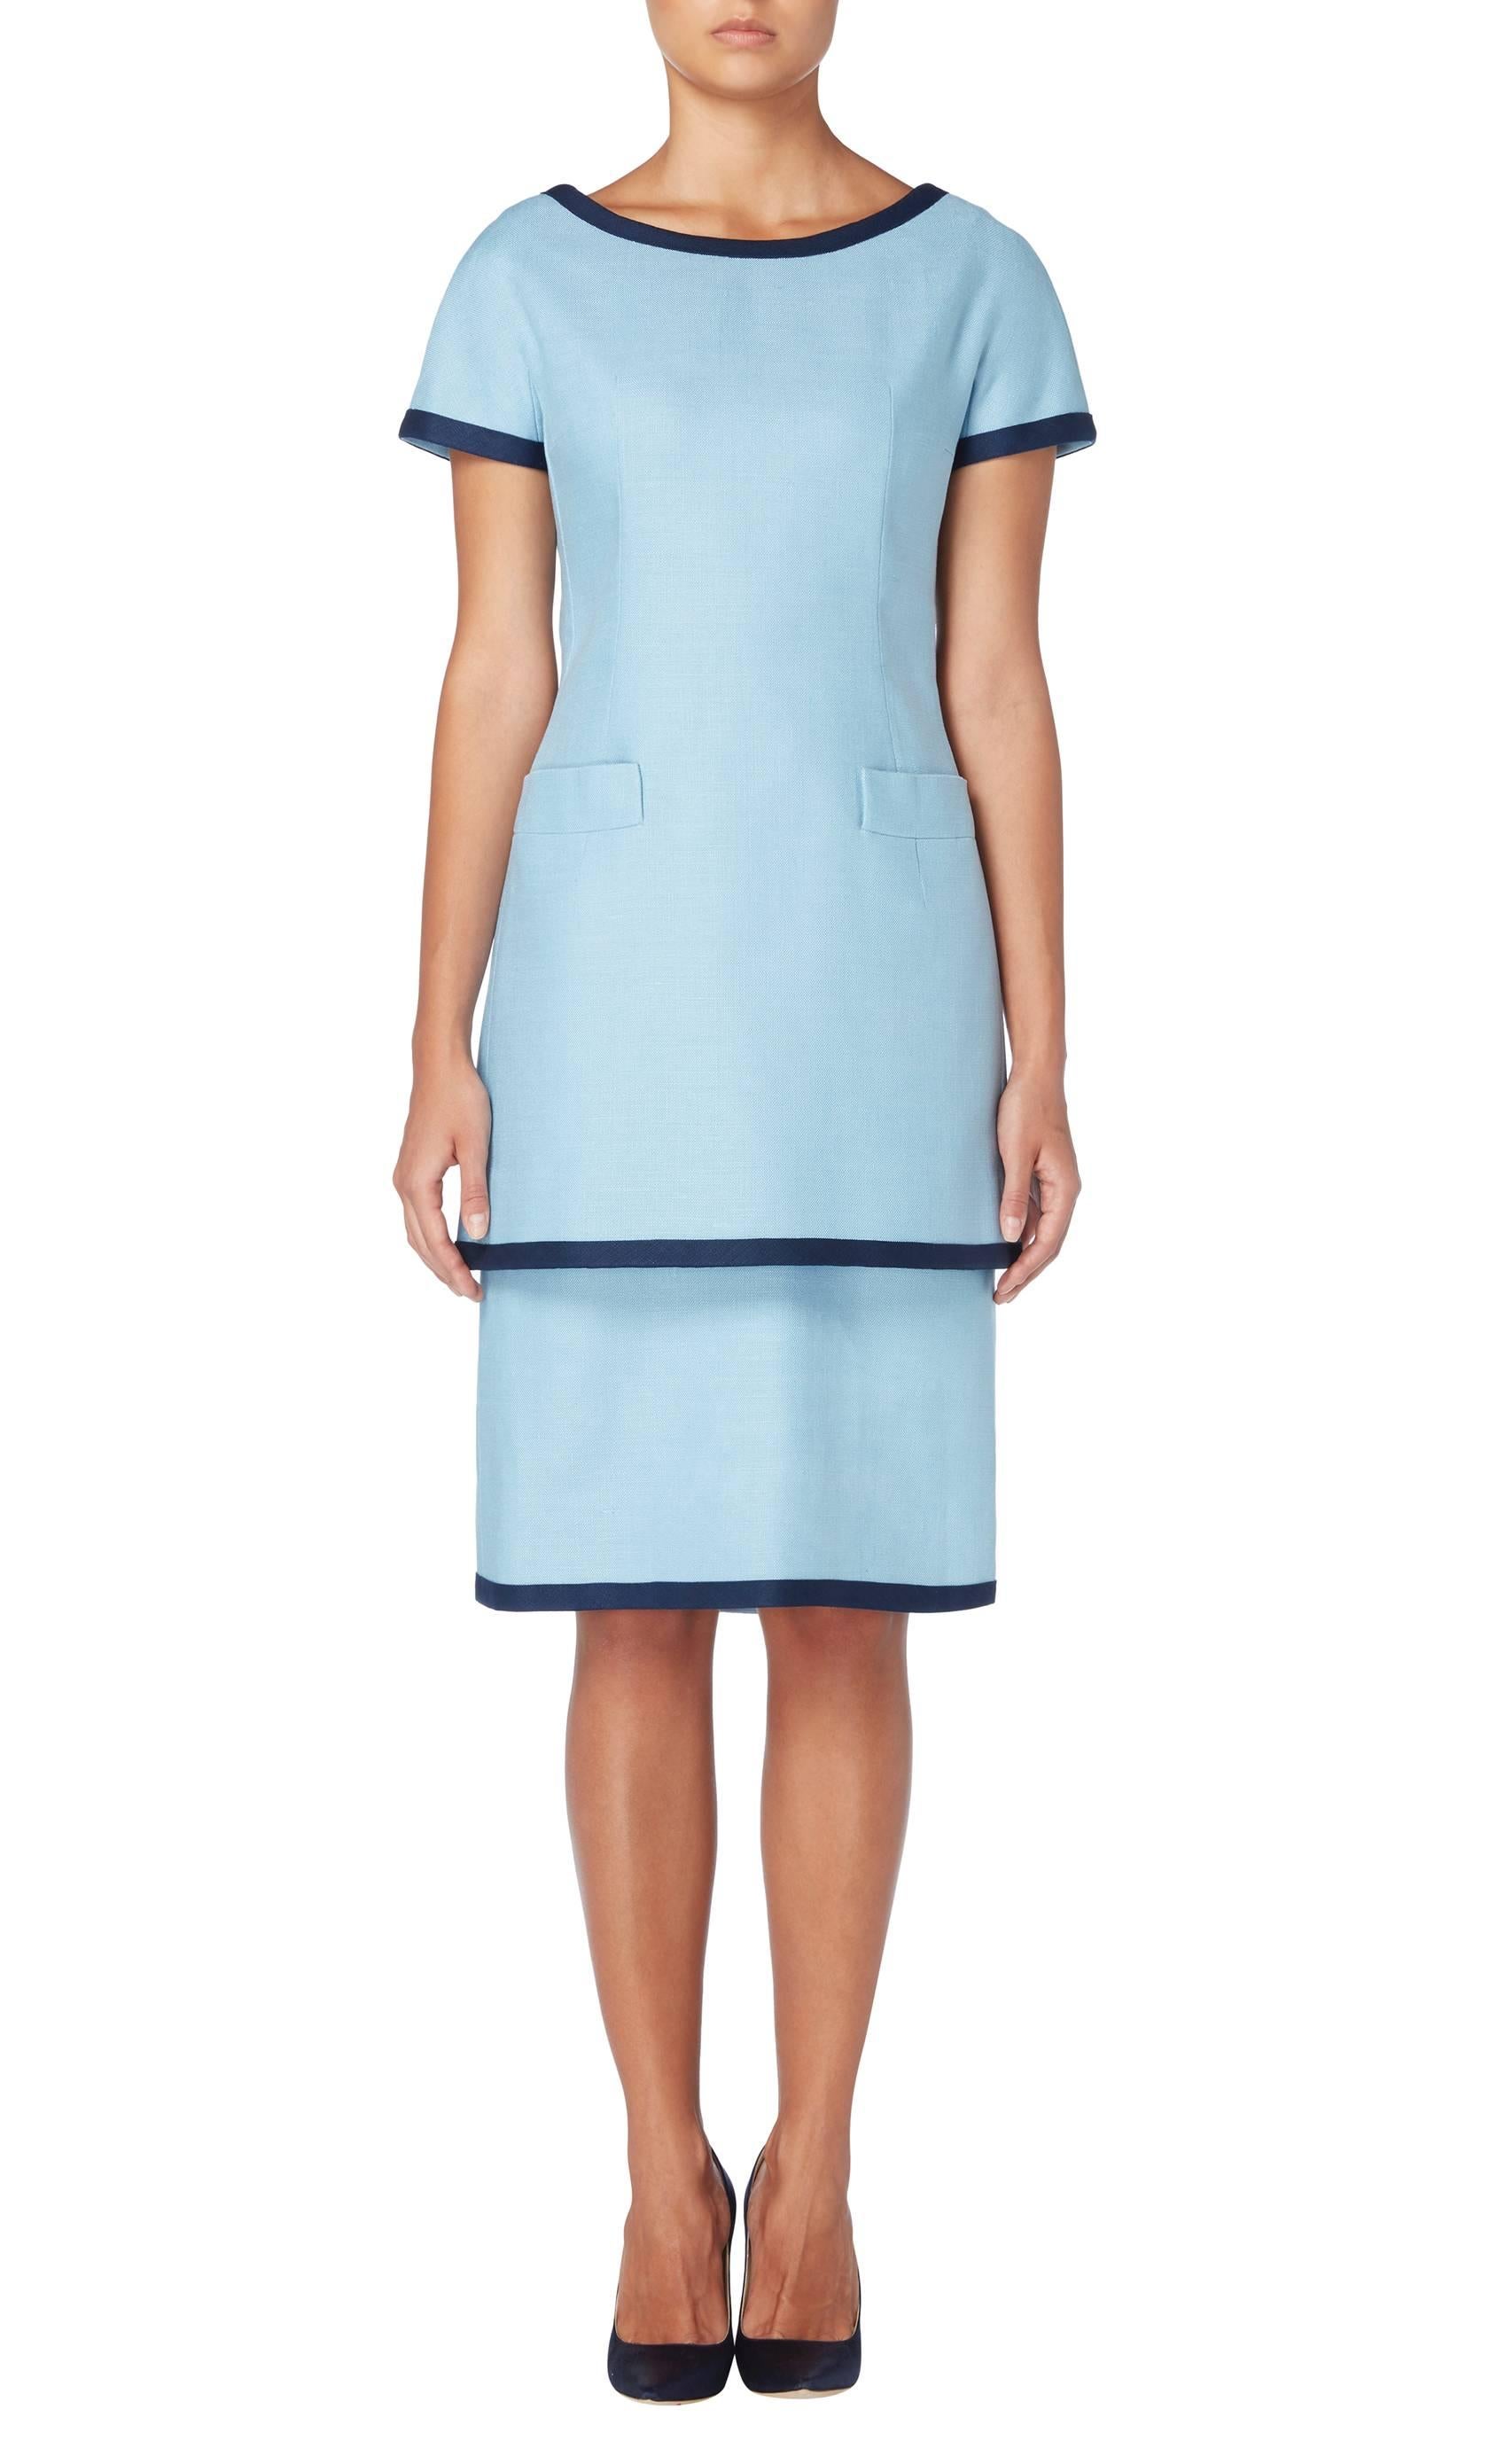 Ideal for the office or daytime events, this Dior two-piece dress will make a great addition to a summer wardrobe. Comprising of a sleeveless silk and linen under dress, and a short sleeved over dress, both pieces feature a contrasting navy blue